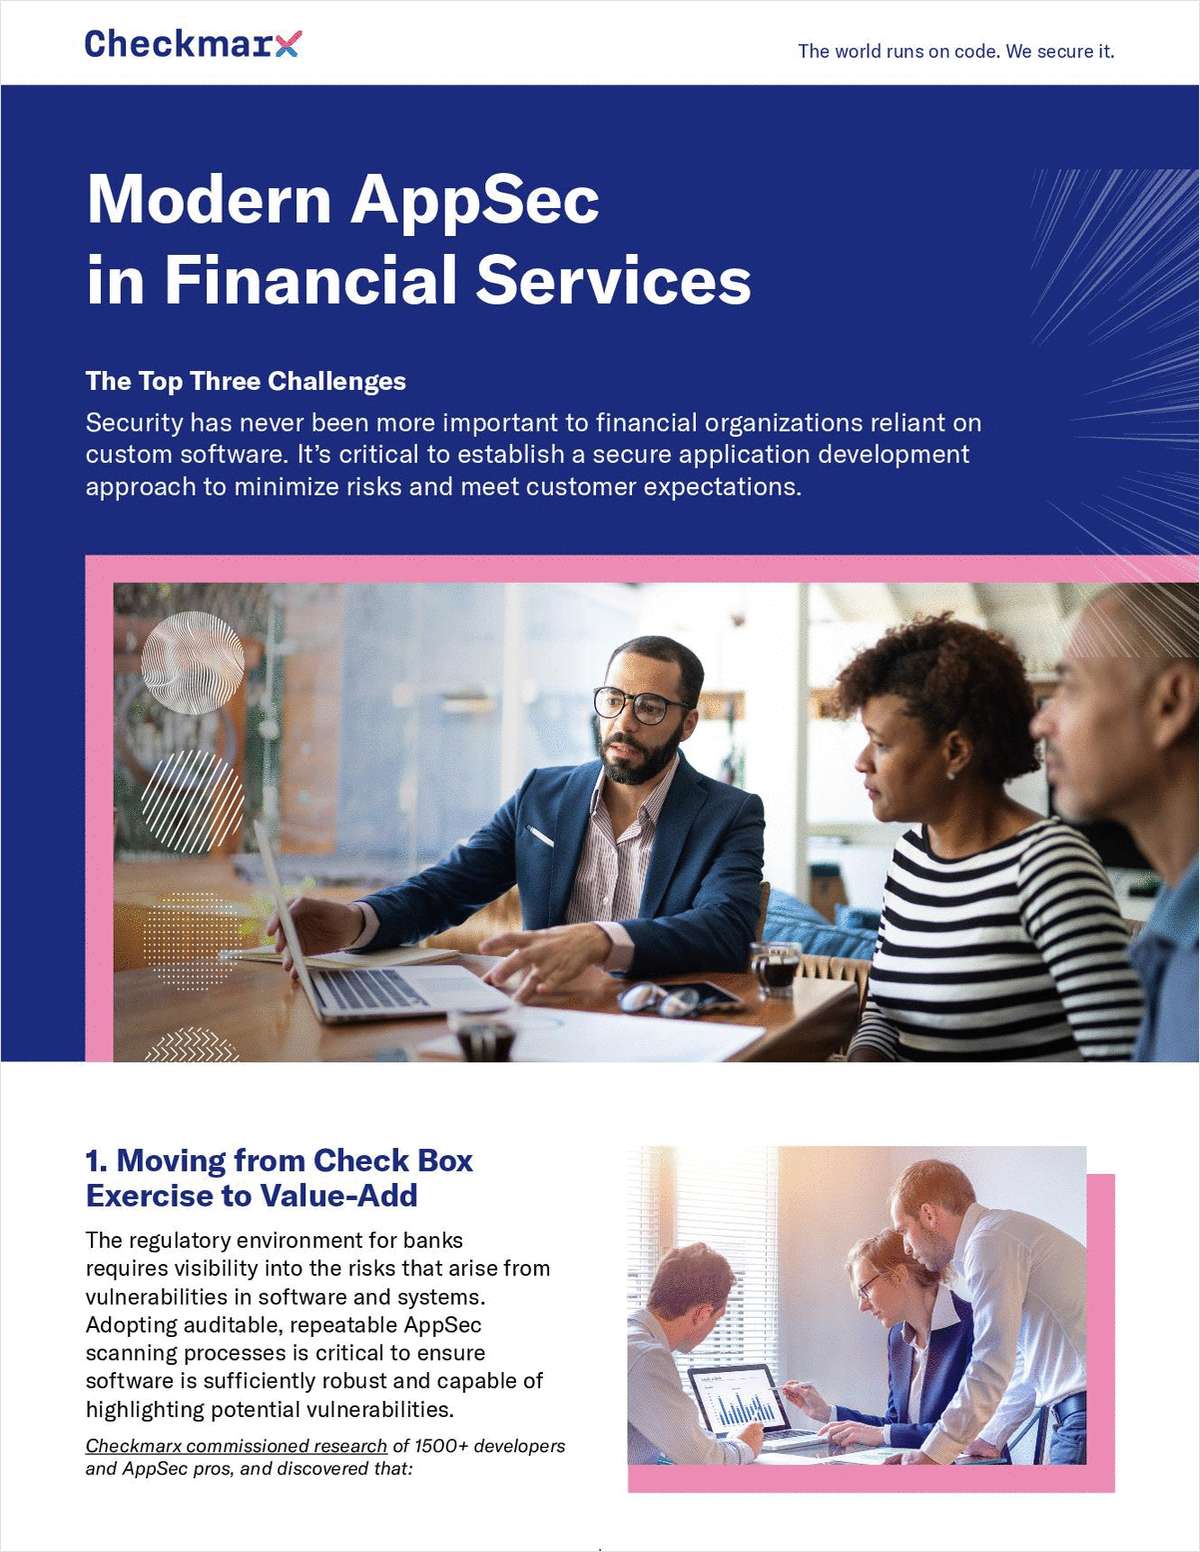 Modern AppSec in Financial Services